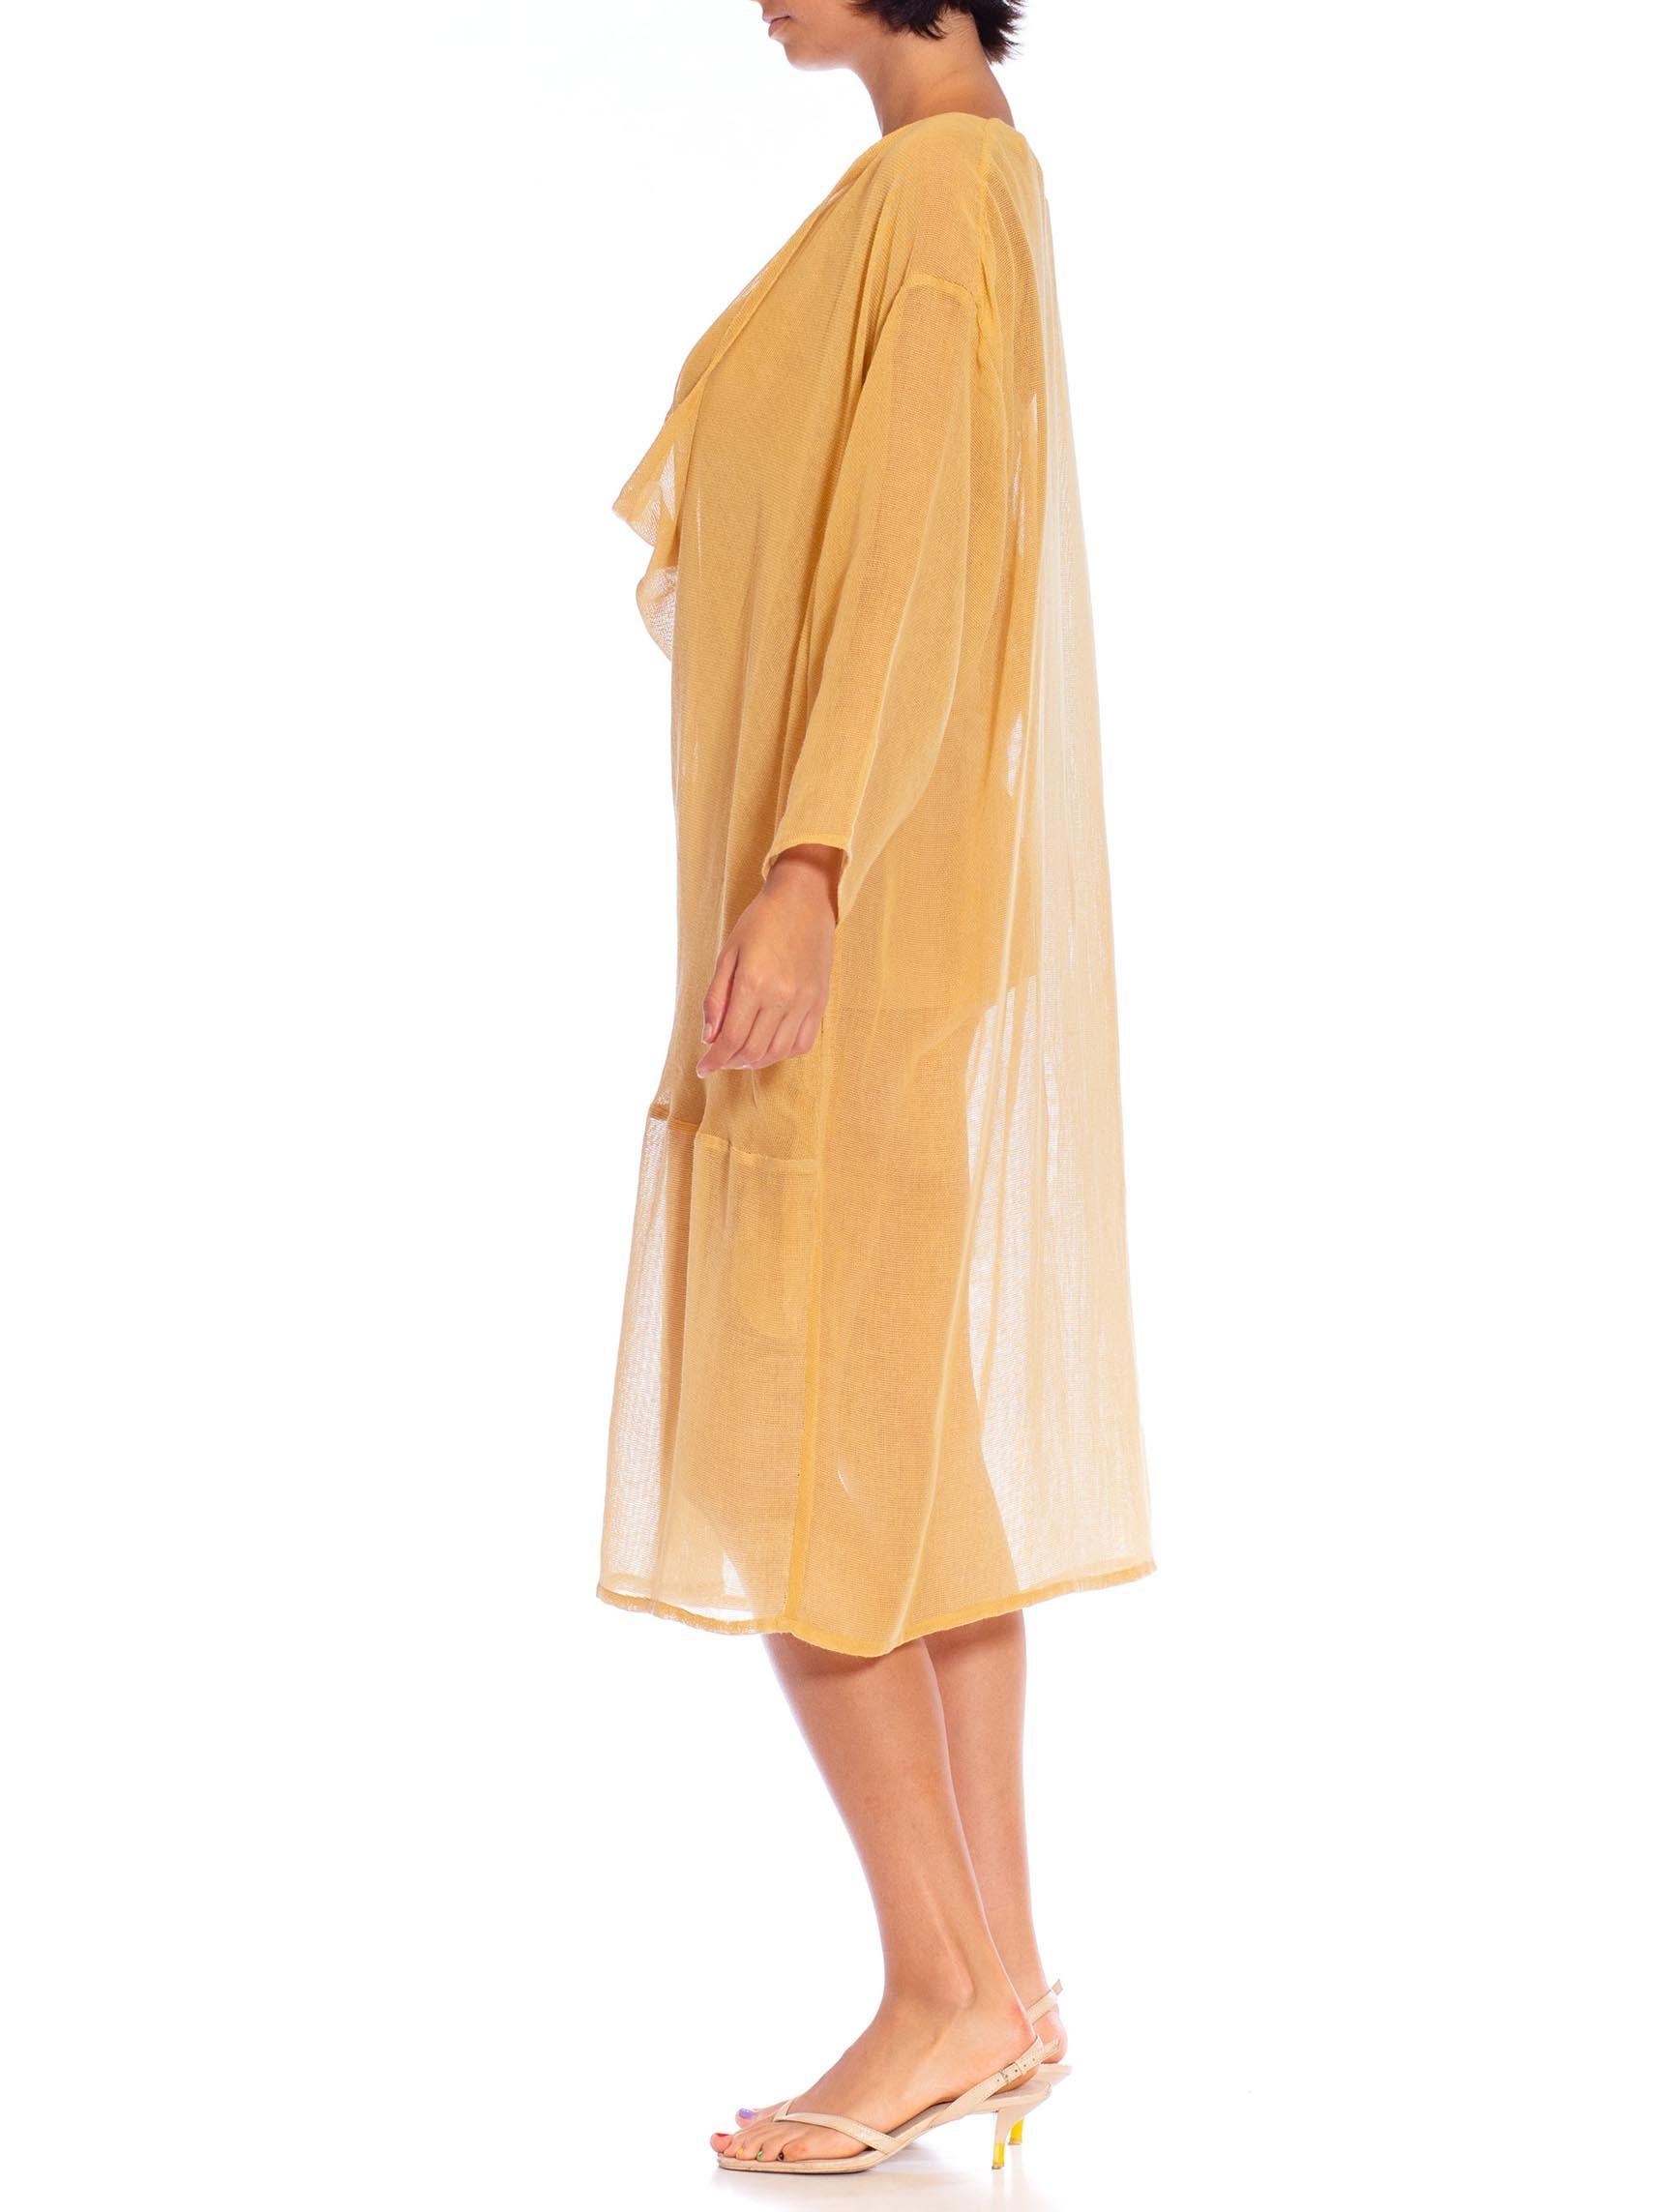 Made from vintage deadstock fabric from the 1970s, french seamed with pockets. MORPHEW COLLECTION Mustard Yellow Cotton Blend Gauze Unisex Cowl-Neck Tunic Top 
MORPHEW COLLECTION is made entirely by hand in our NYC Ateliér of rare antique materials